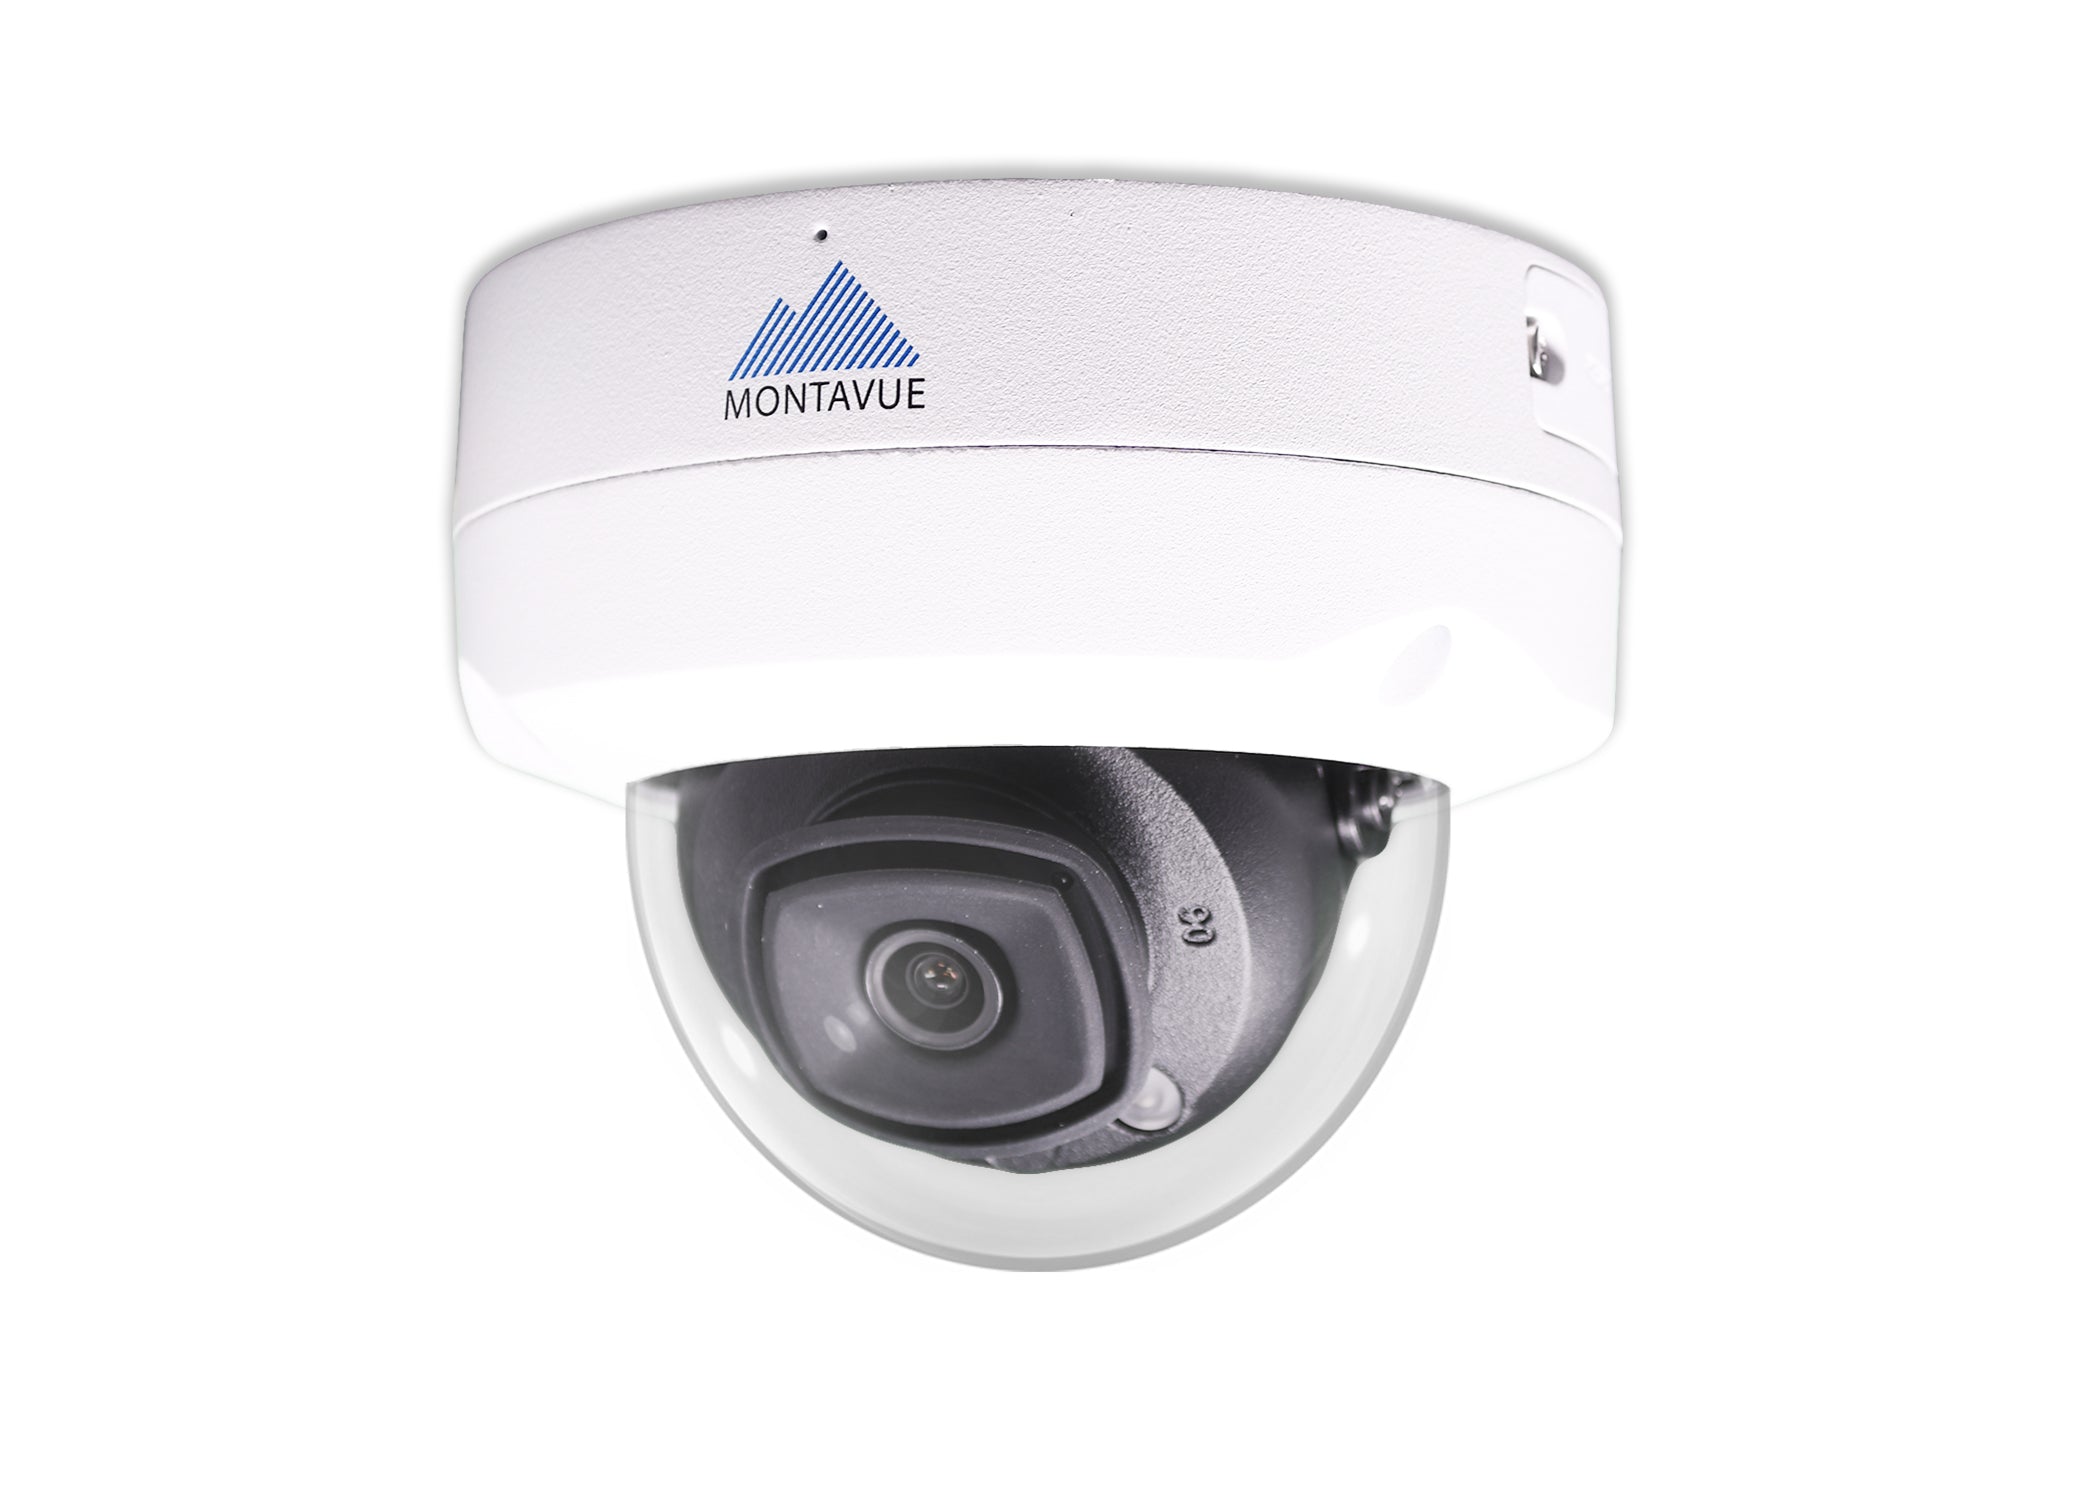 MTD8110 Package | 4K Acupick Vandal-Proof Dome Cameras and 32 Channel 5 Series AI NVR with 6TB HDD - Montavue